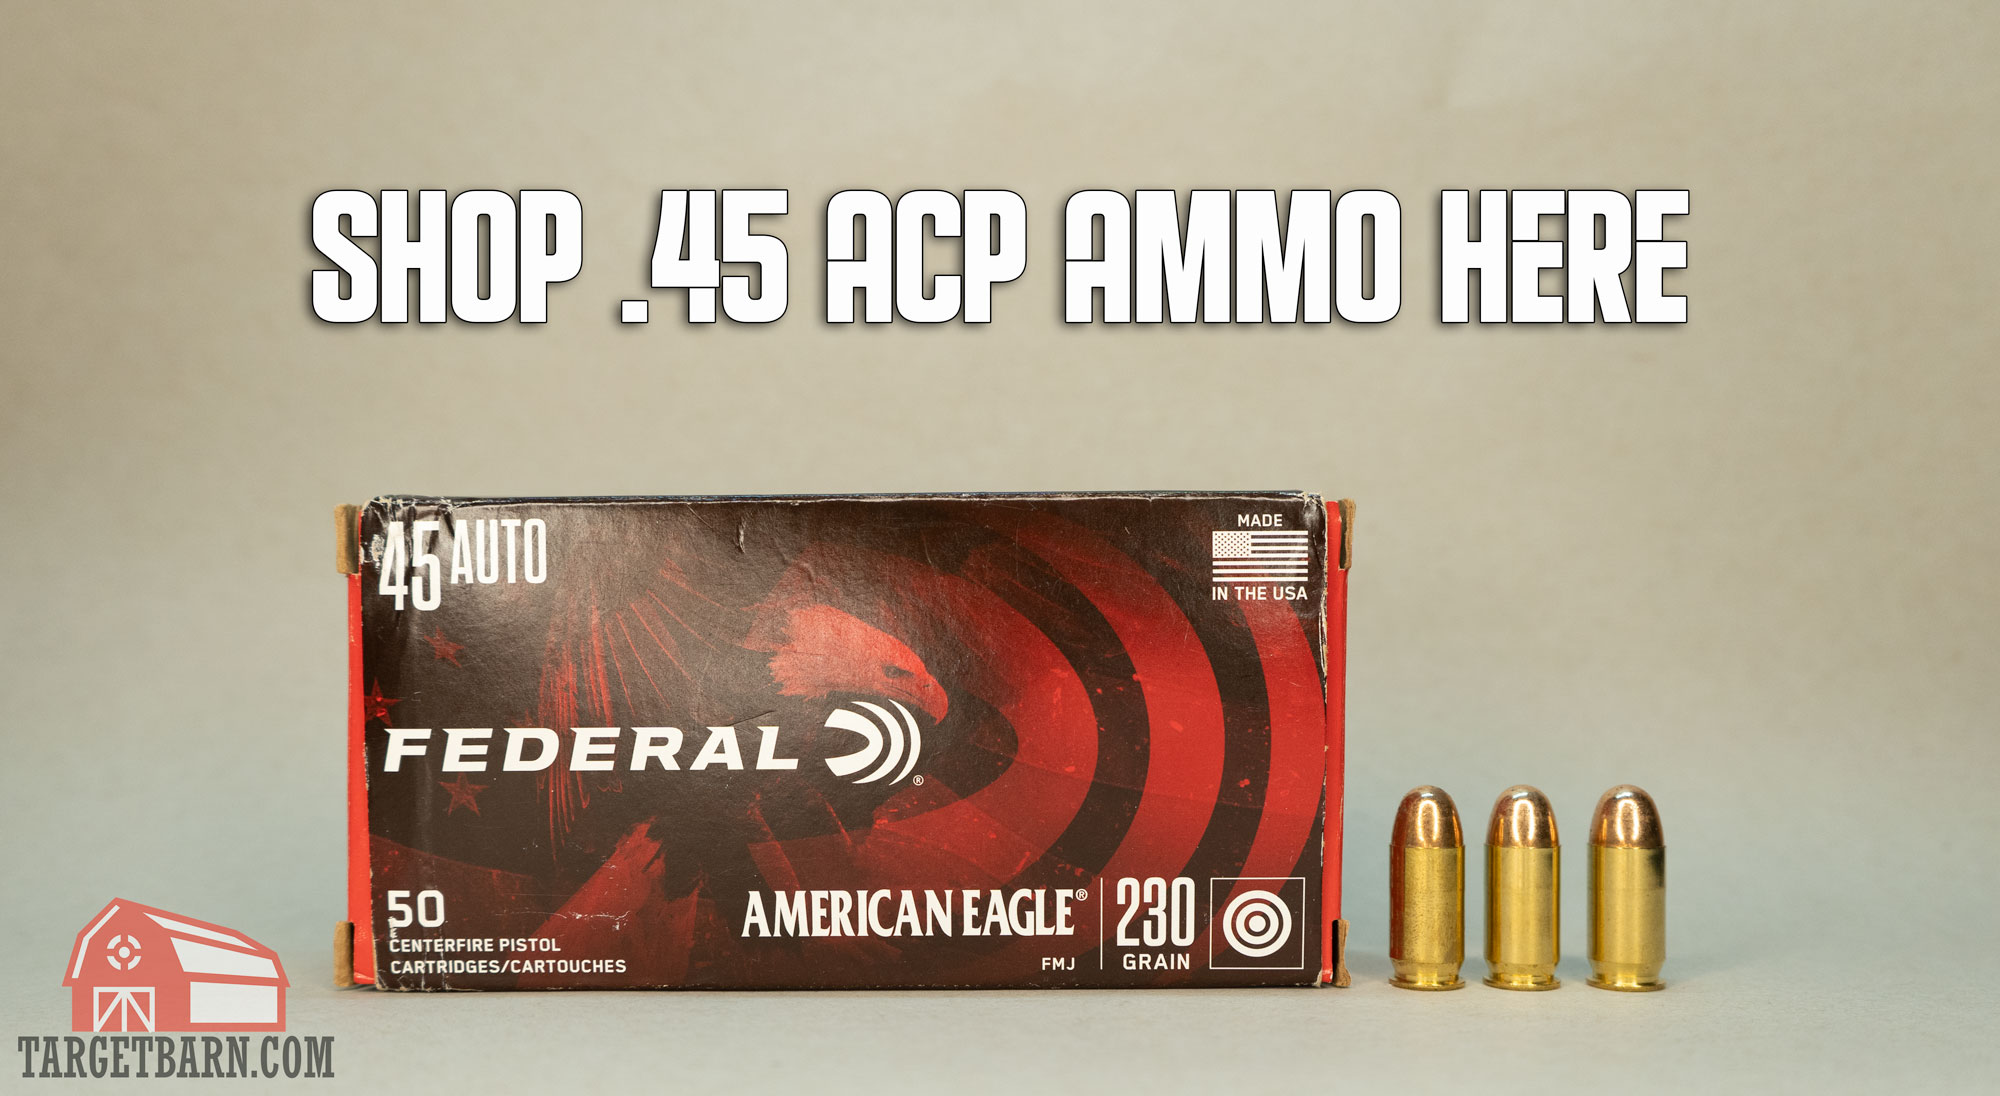 a box and three rounds of 45 acp ammo with text that says shop .45 acp ammo here